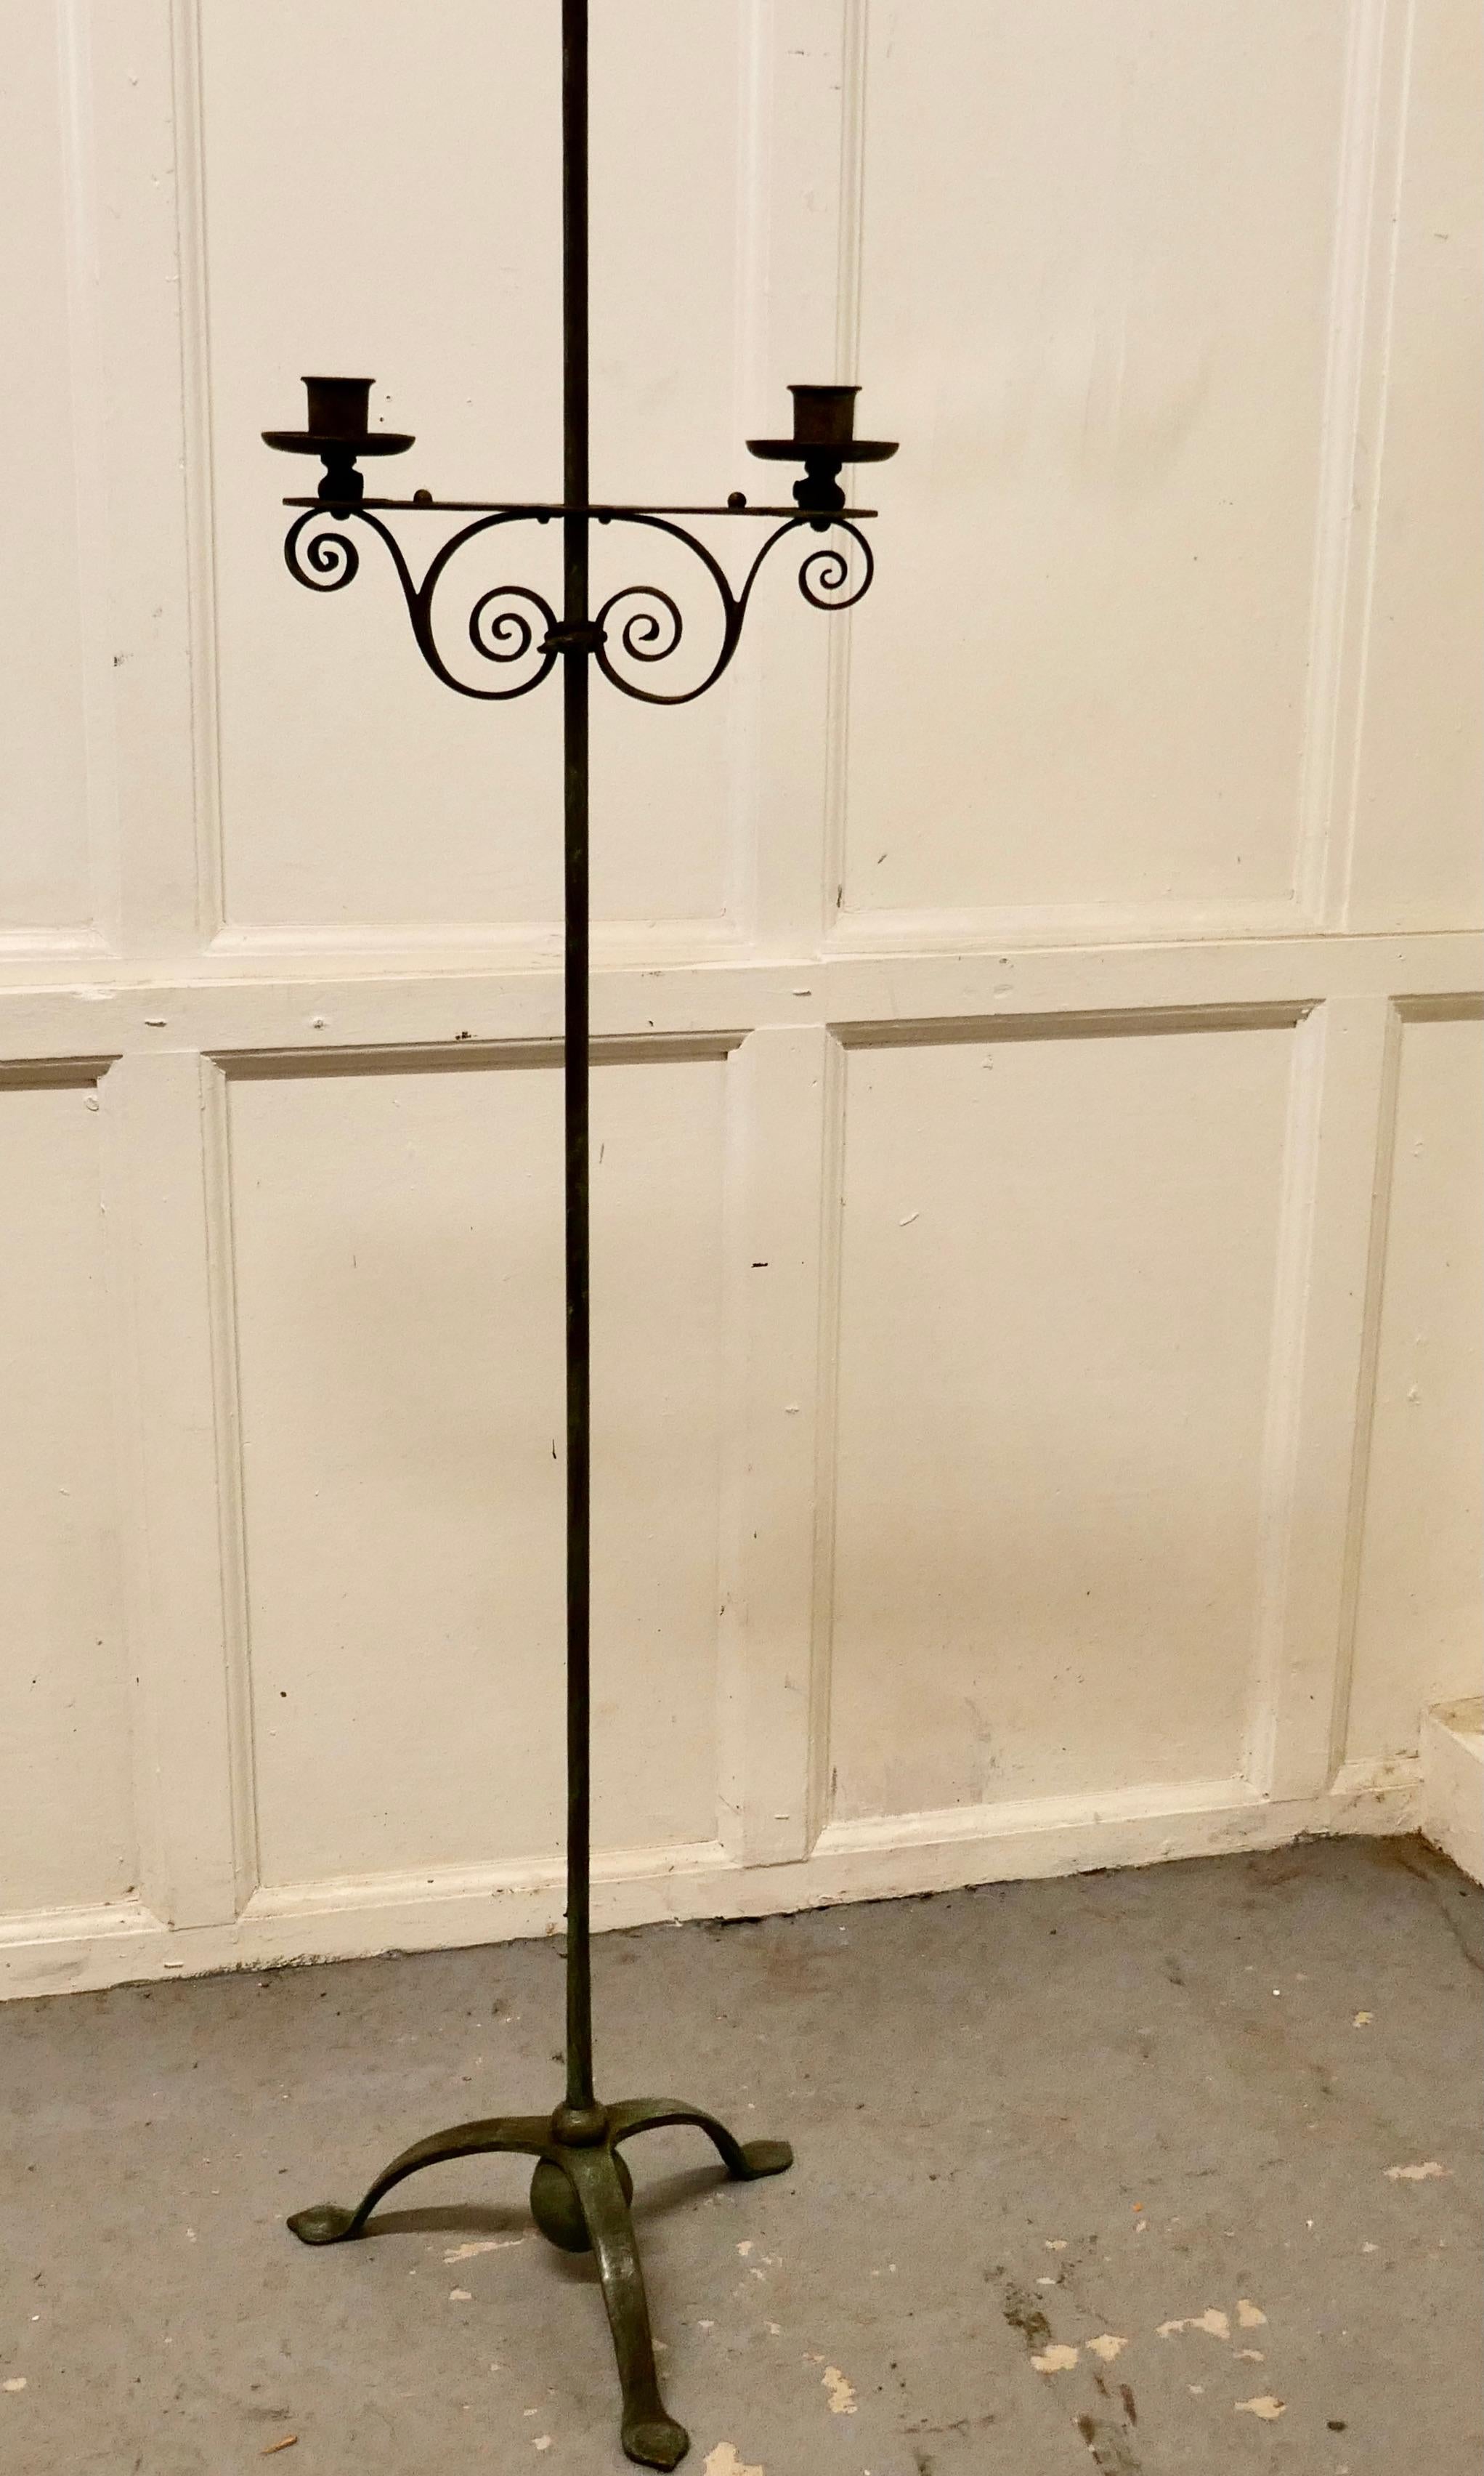 Tall arts and crafts wrought iron candle stick or torchère

This is a tall torchere, it takes 2 candles and these can be raised or lowered to suit
The stand is blacksmith made, it has been kept well and has a slightly verdigris patina and is not